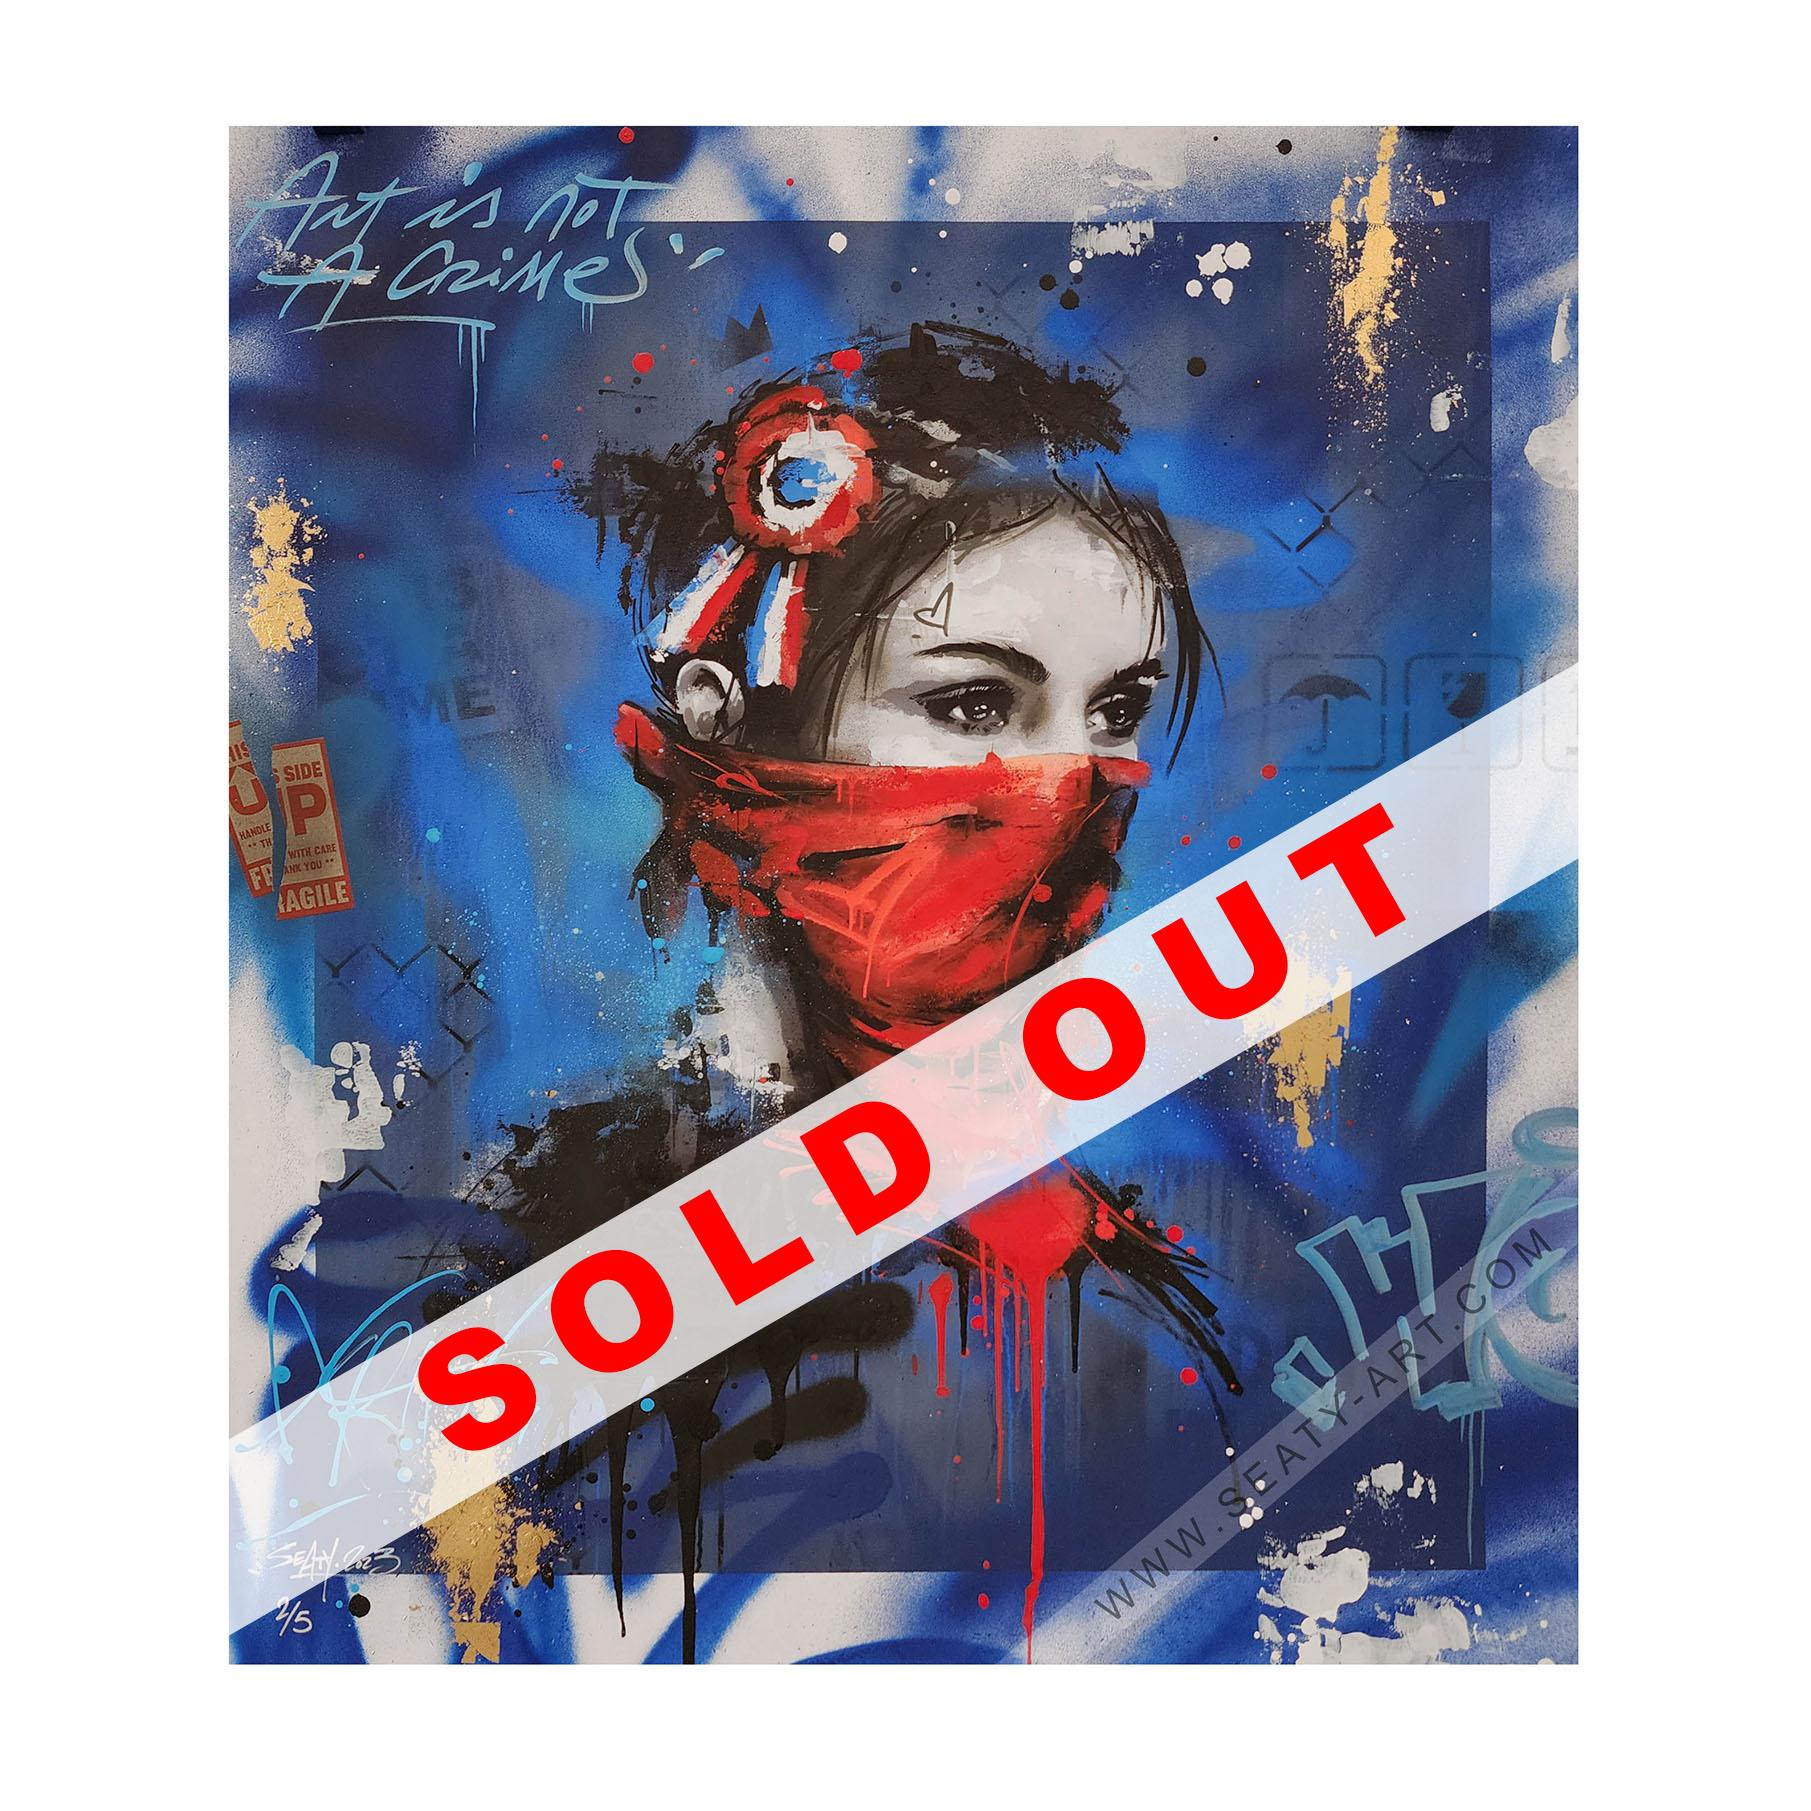 Sold out site 11